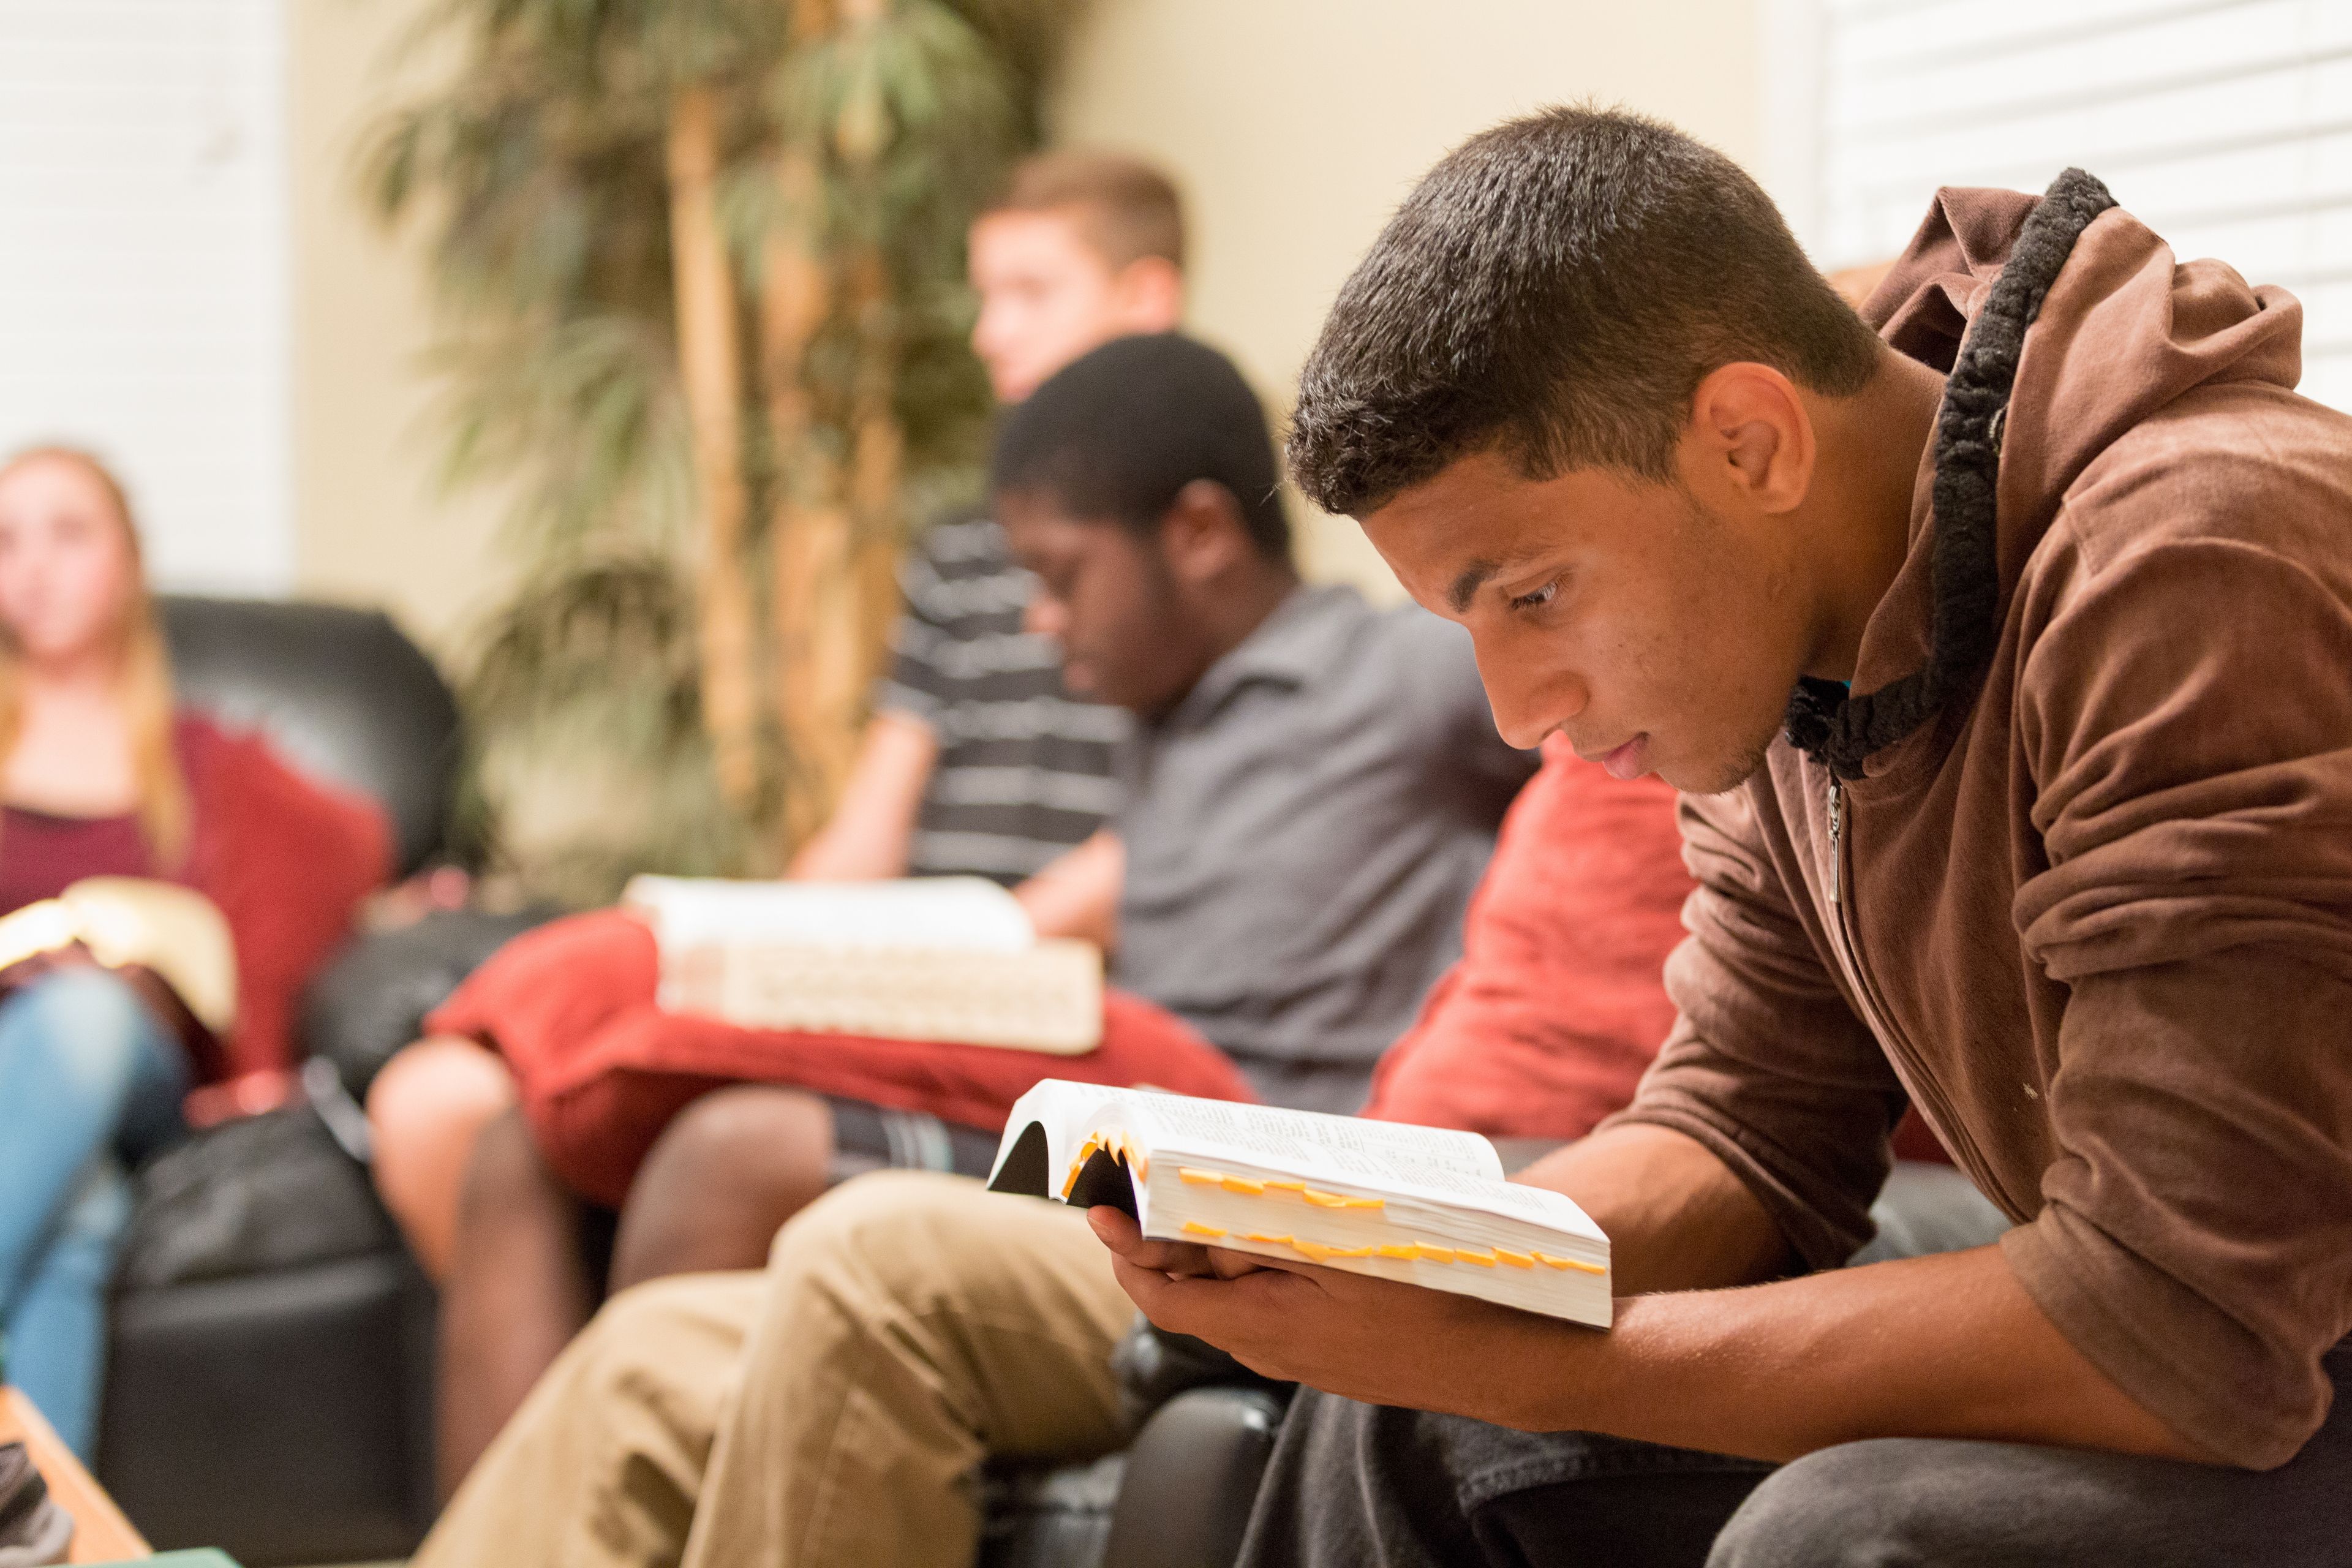 A group of youth reading scriptures together in Florida.